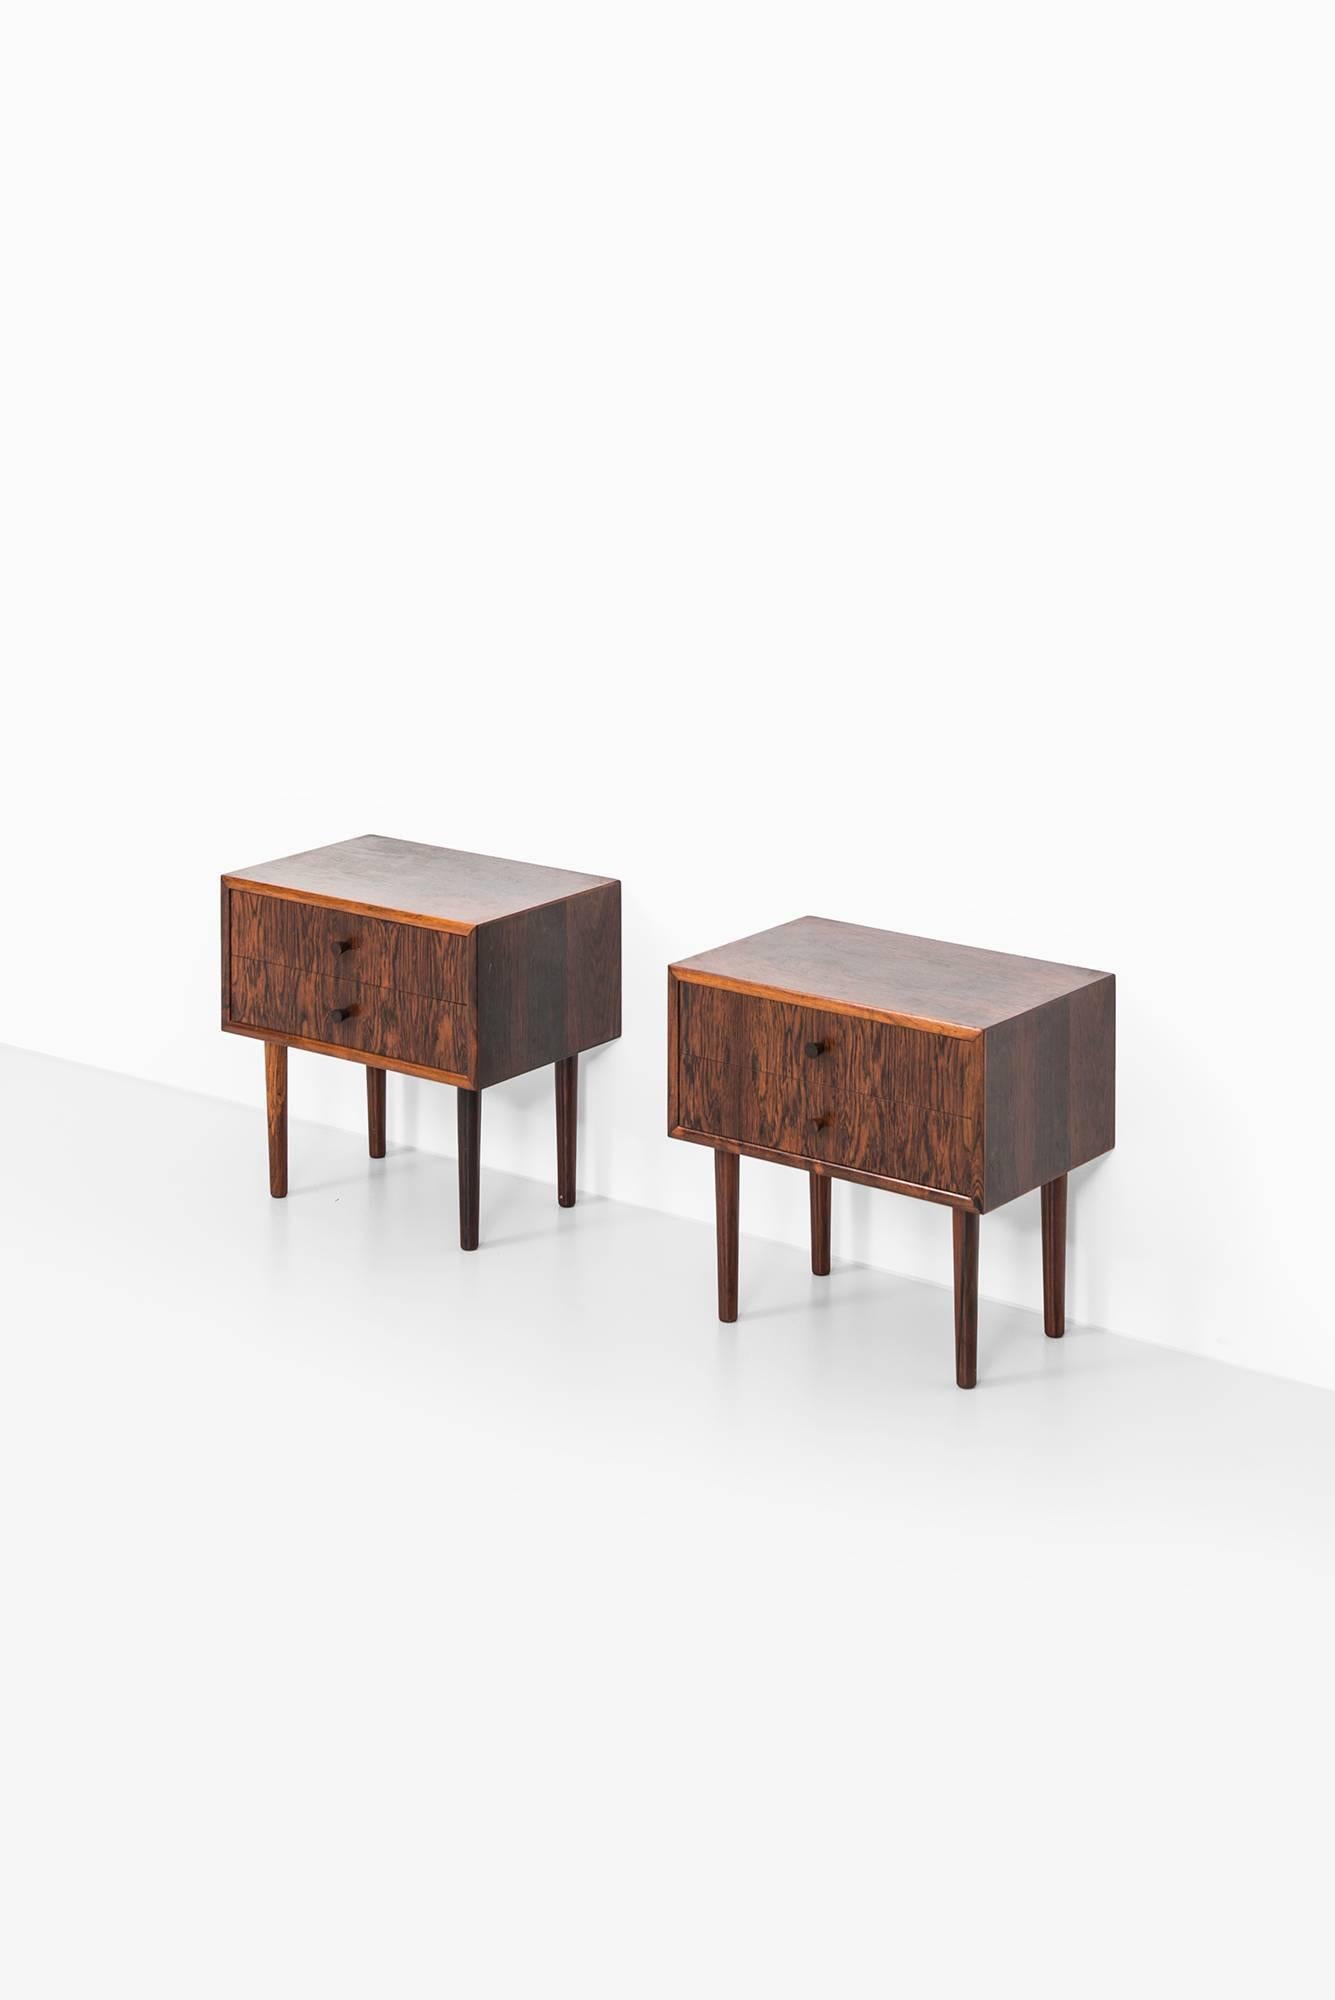 Danish A pair of bedside tables in rosewood produced in Denmark